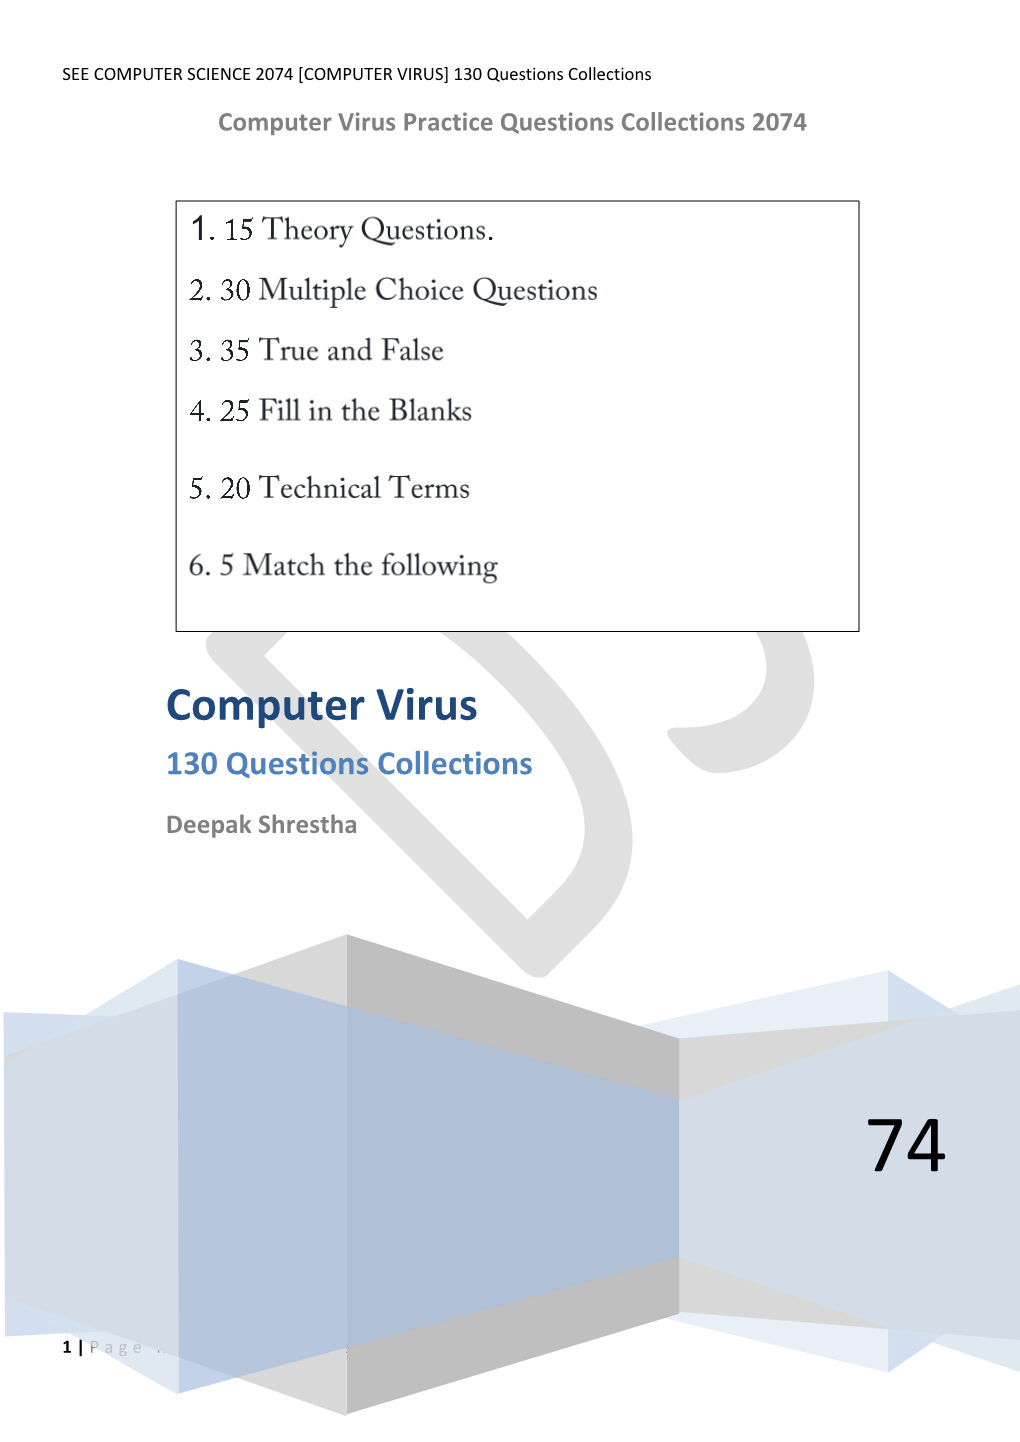 COMPUTER VIRUS] 130 Questions Collections